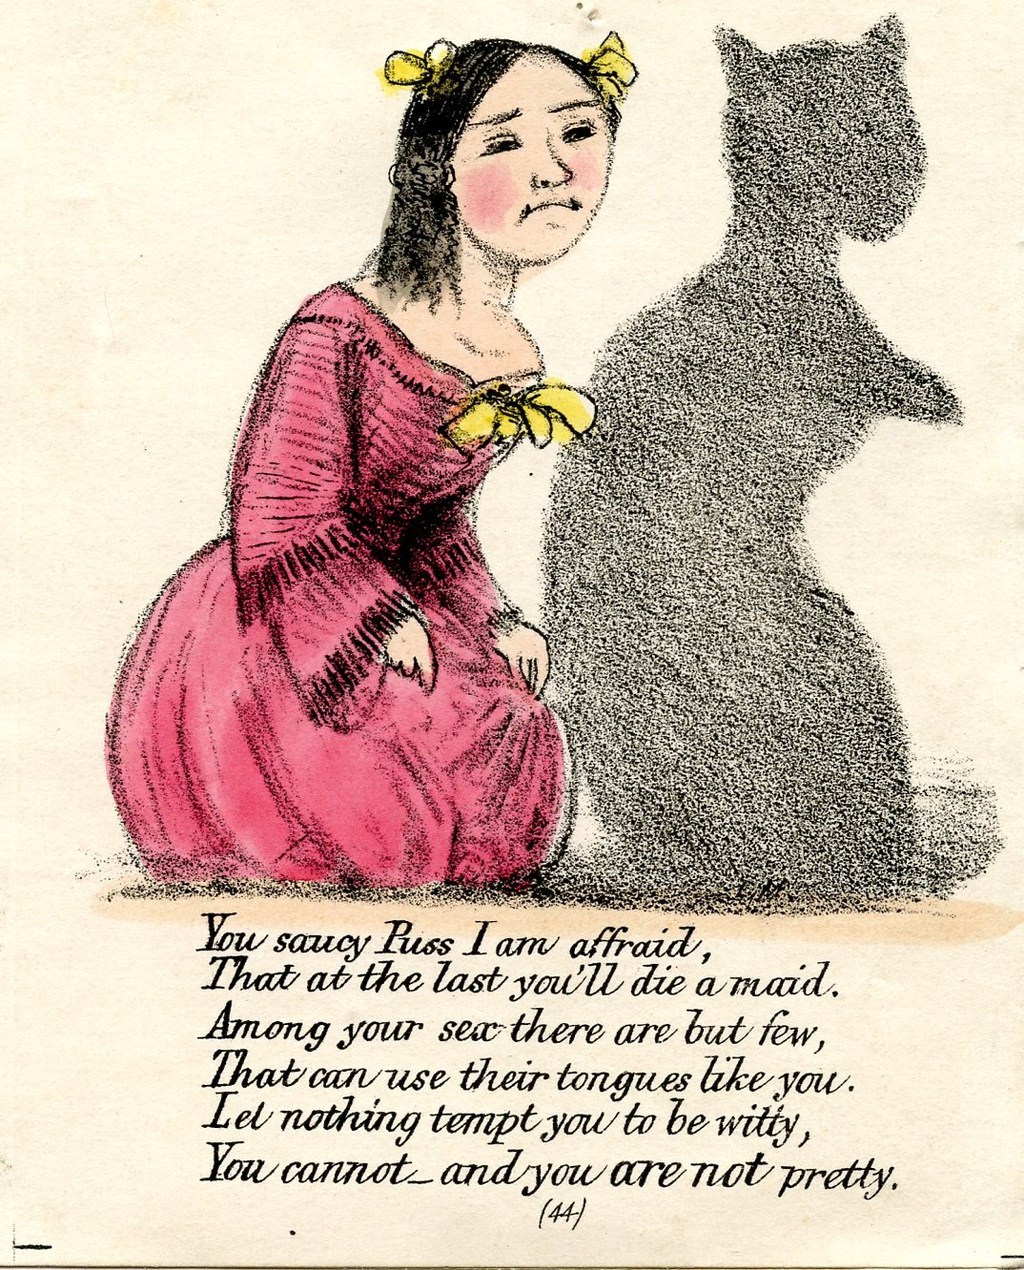 9 Incredibly Cruel Valentine's Day Cards From Victorian Times